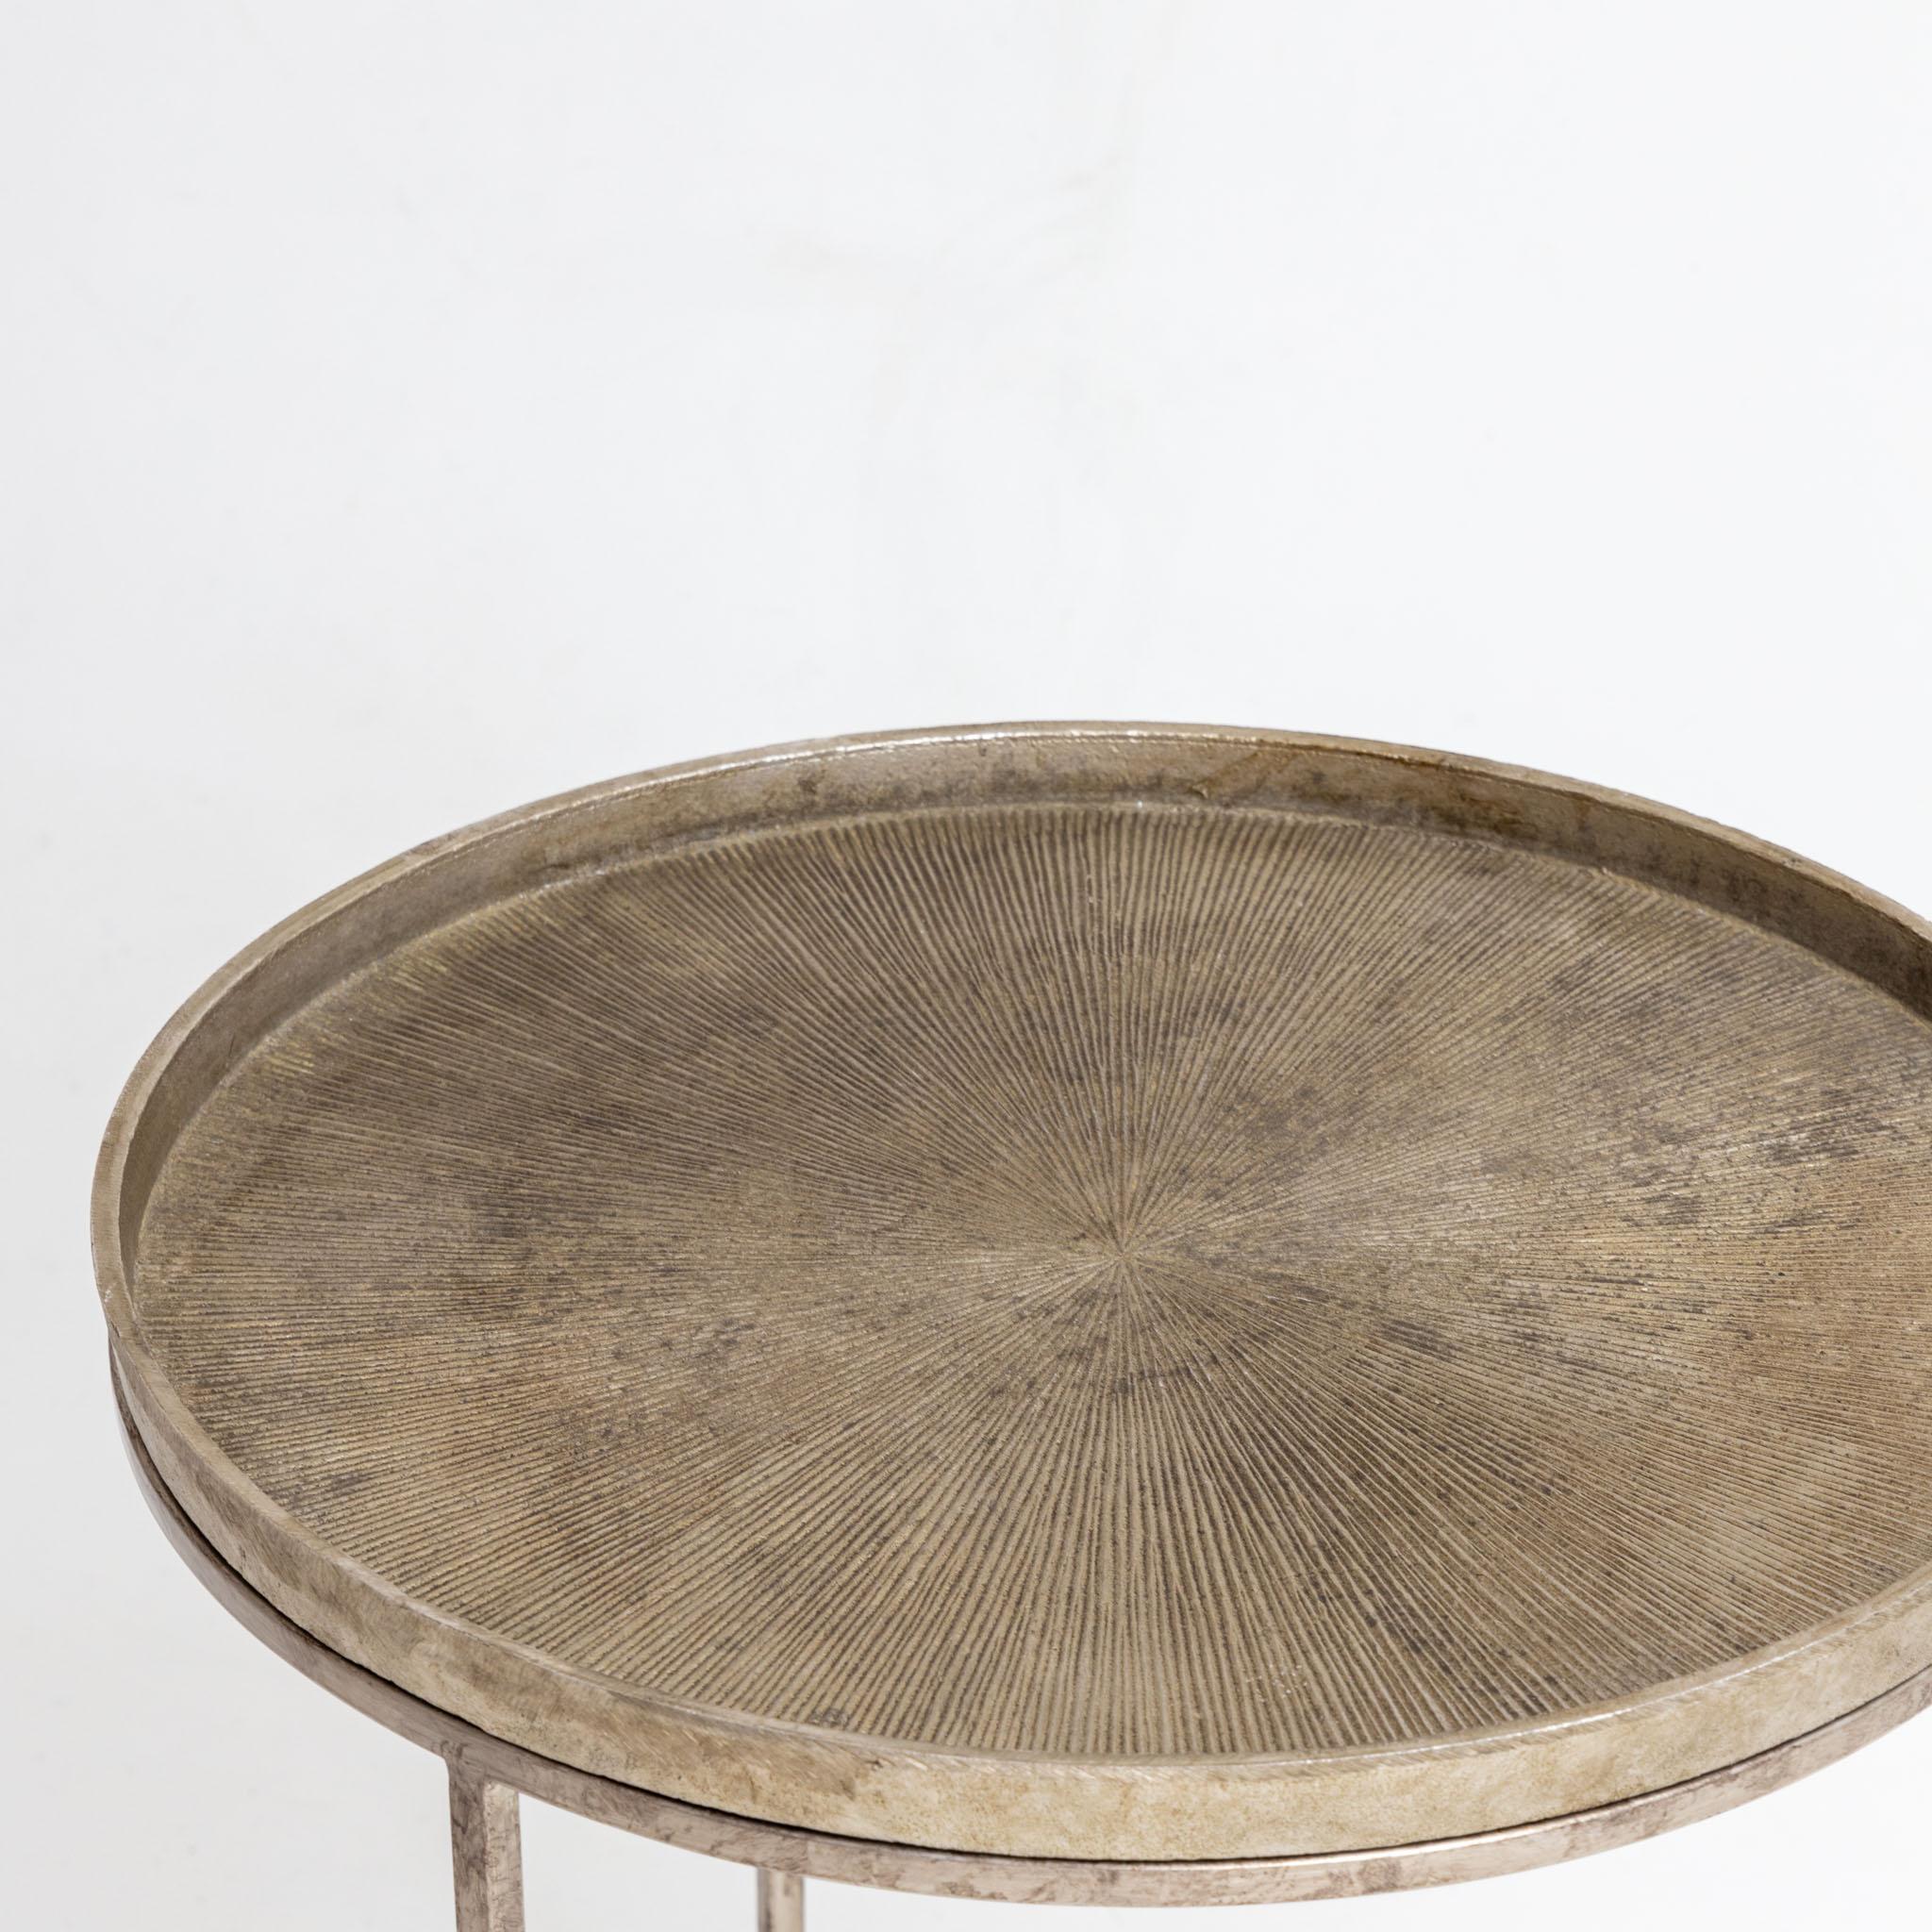 Round metal side table with radial textured table top with narrow rim and three-legged base.